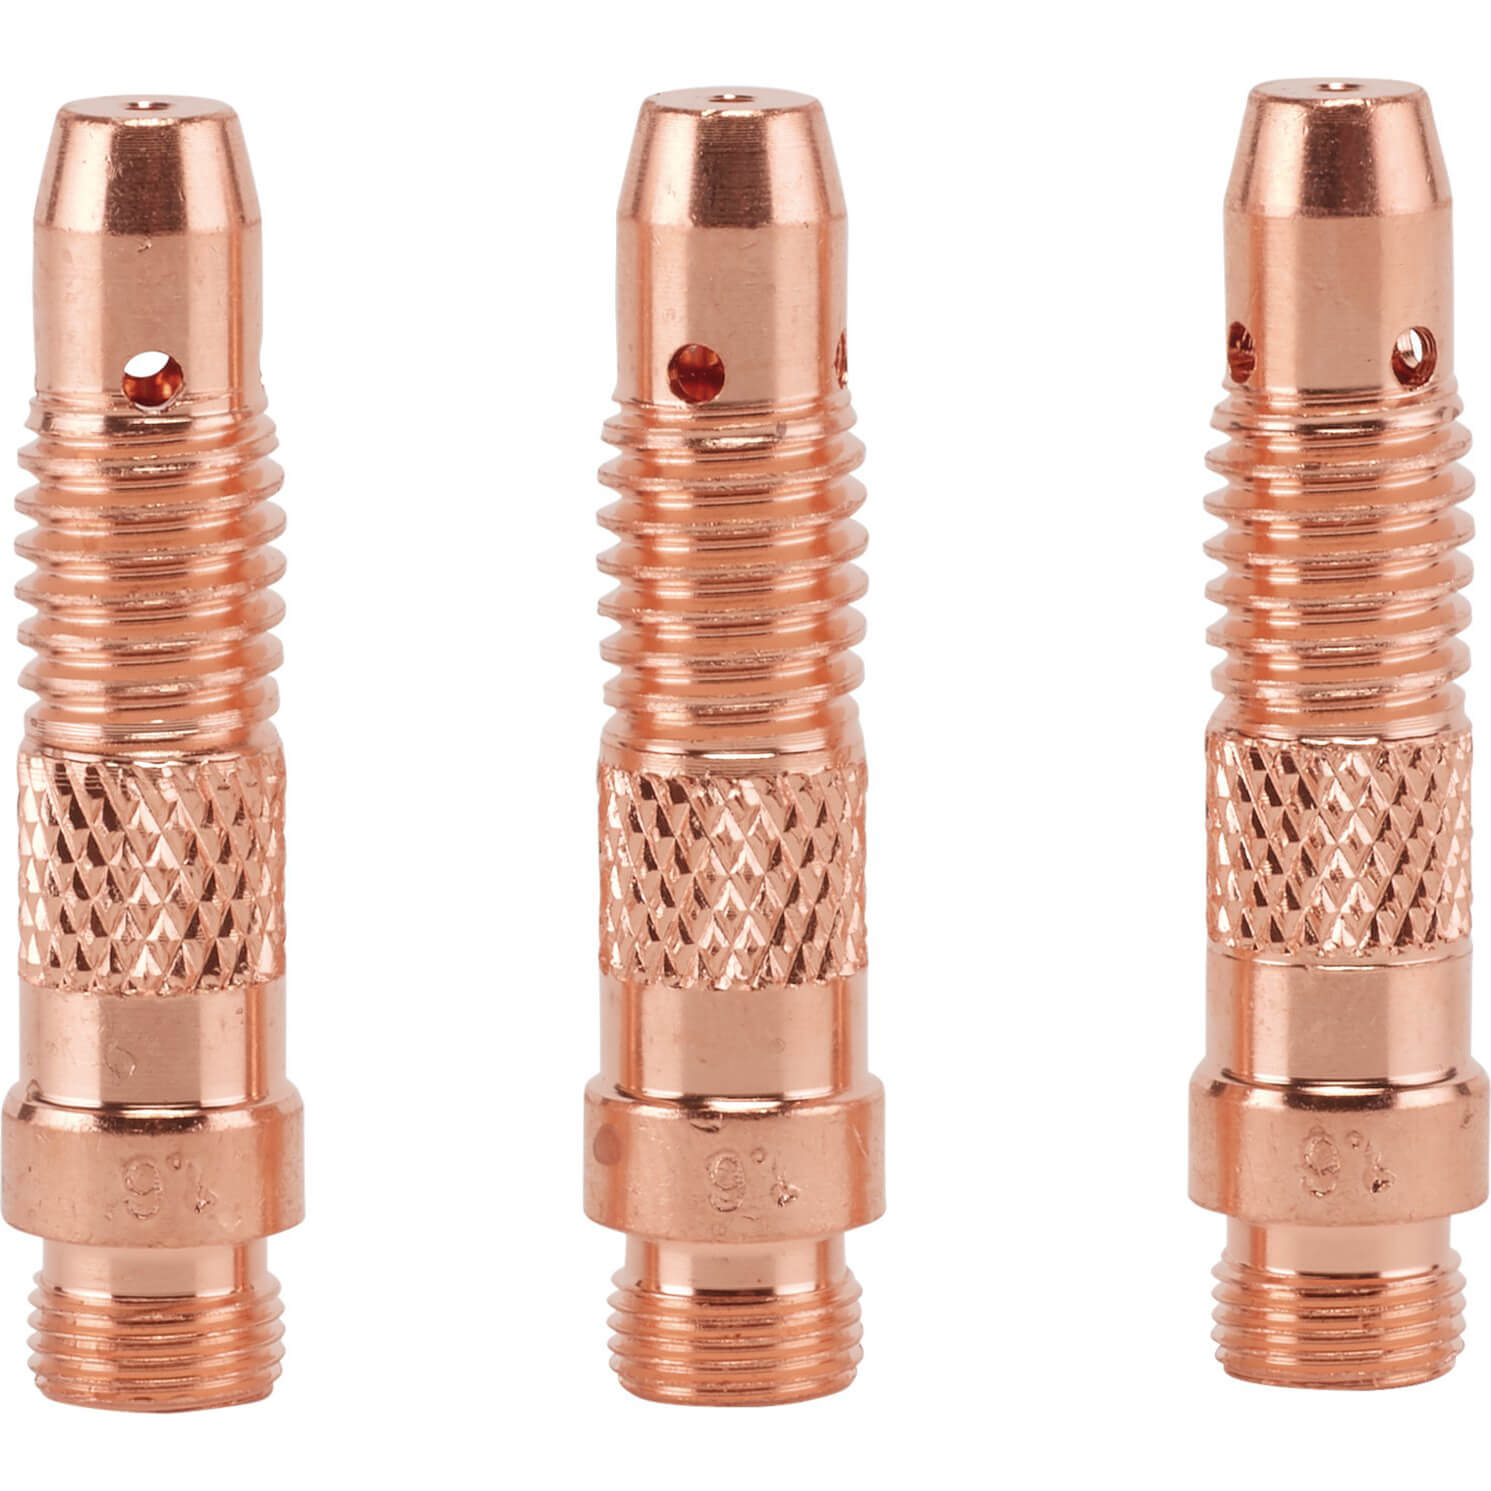 Image of Draper 1.6mm Collet Body for 70087 and 57096 TIG Welding Torch Pack of 3